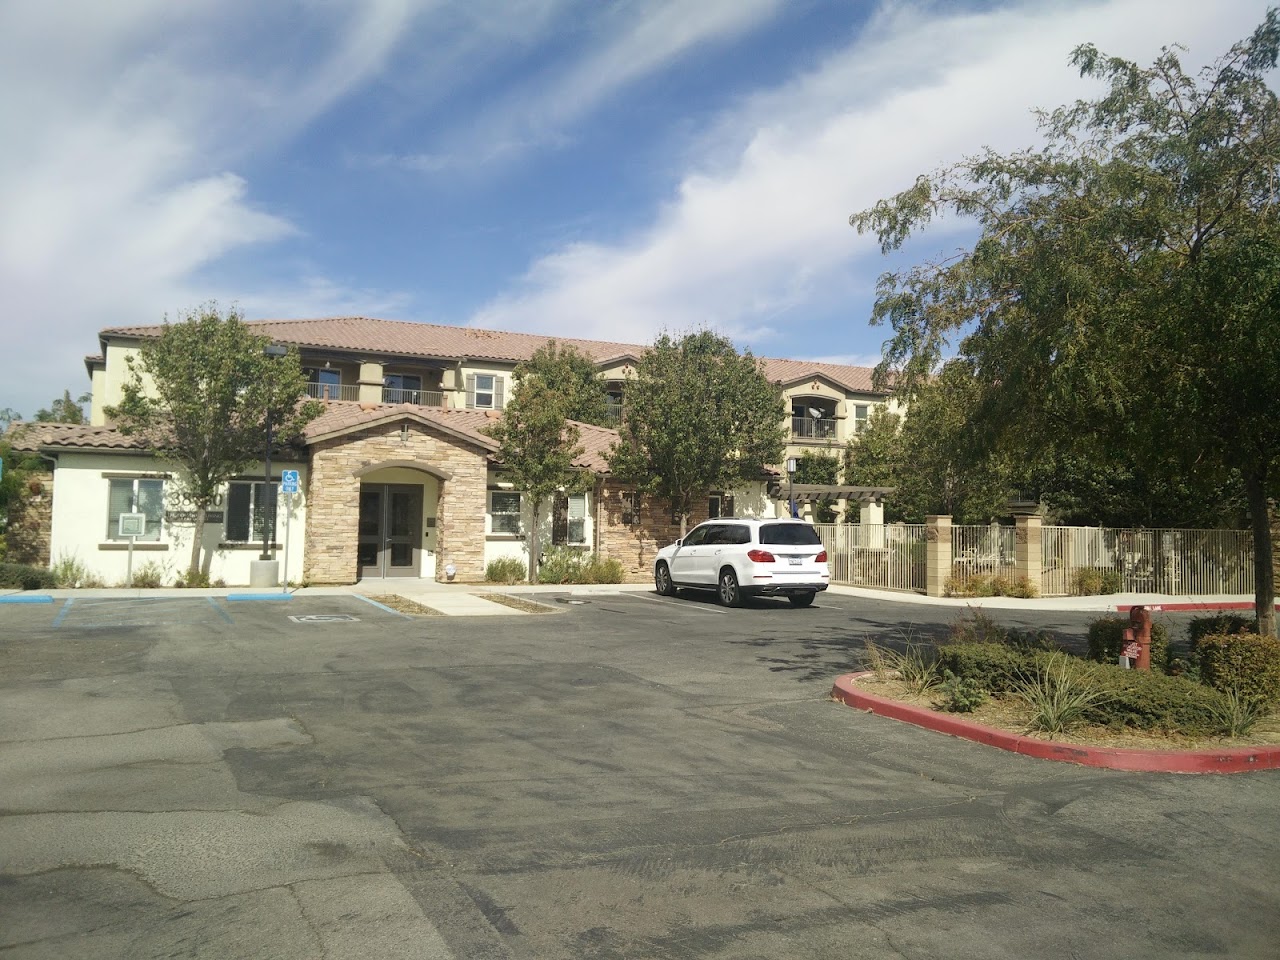 Photo of DESERT SENIOR LIVING. Affordable housing located at 38780 ORCHID VIEW PL PALMDALE, CA 93550